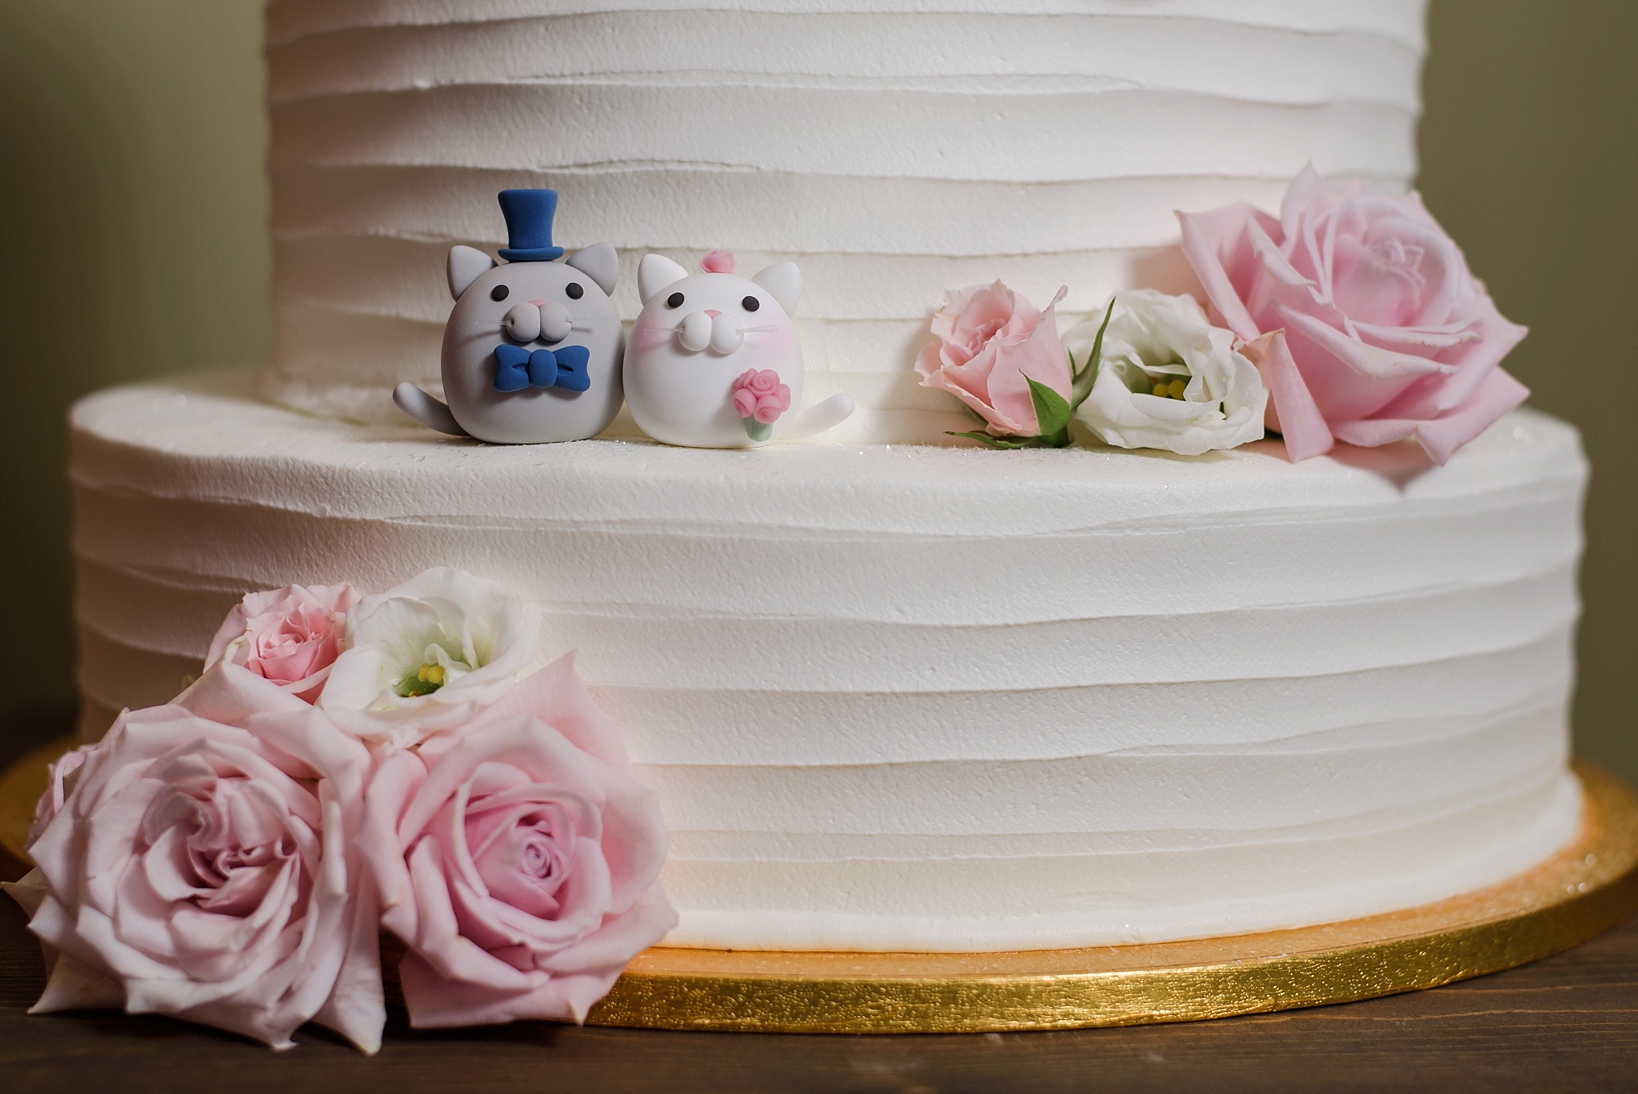 Adorable cat figurines of the bride and groom sit atop the cake layer by Sarah & Ben Photography